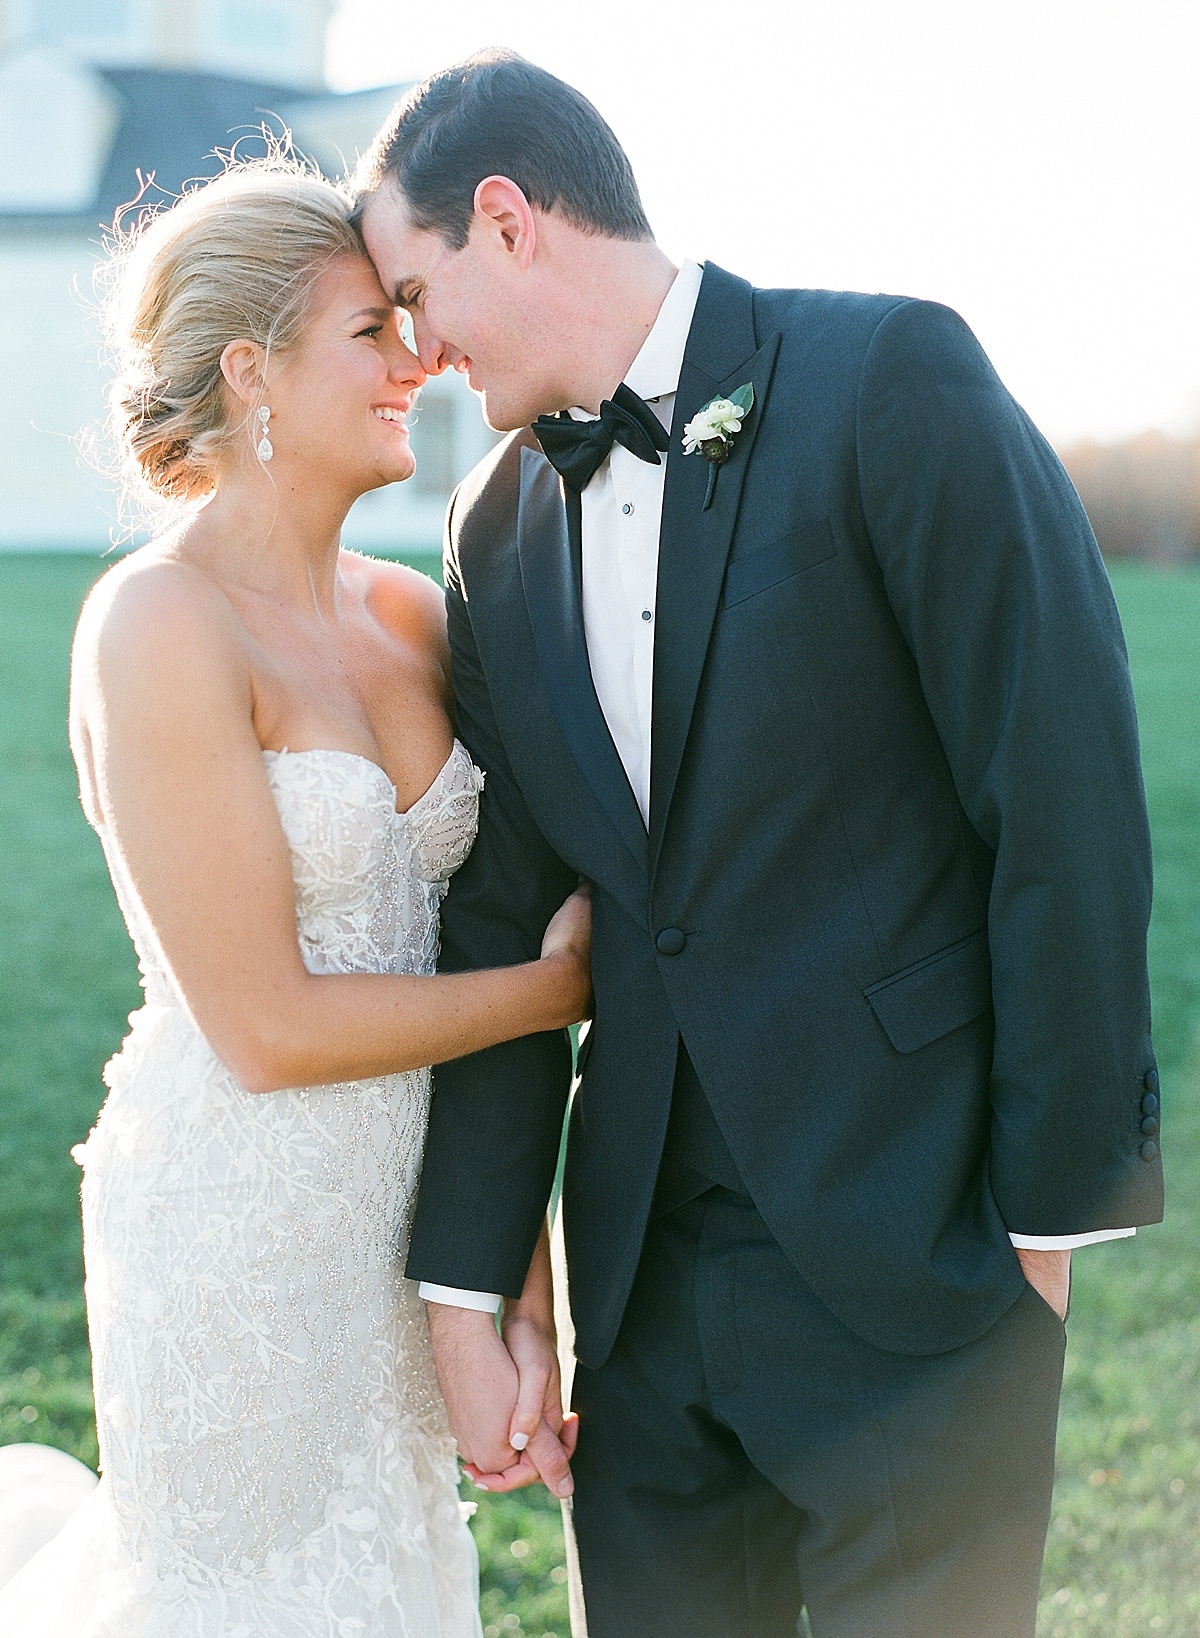 Edgy, geometric winter wedding at Salamander Resort in Middleburg, Virginia | Abby Grace Photography